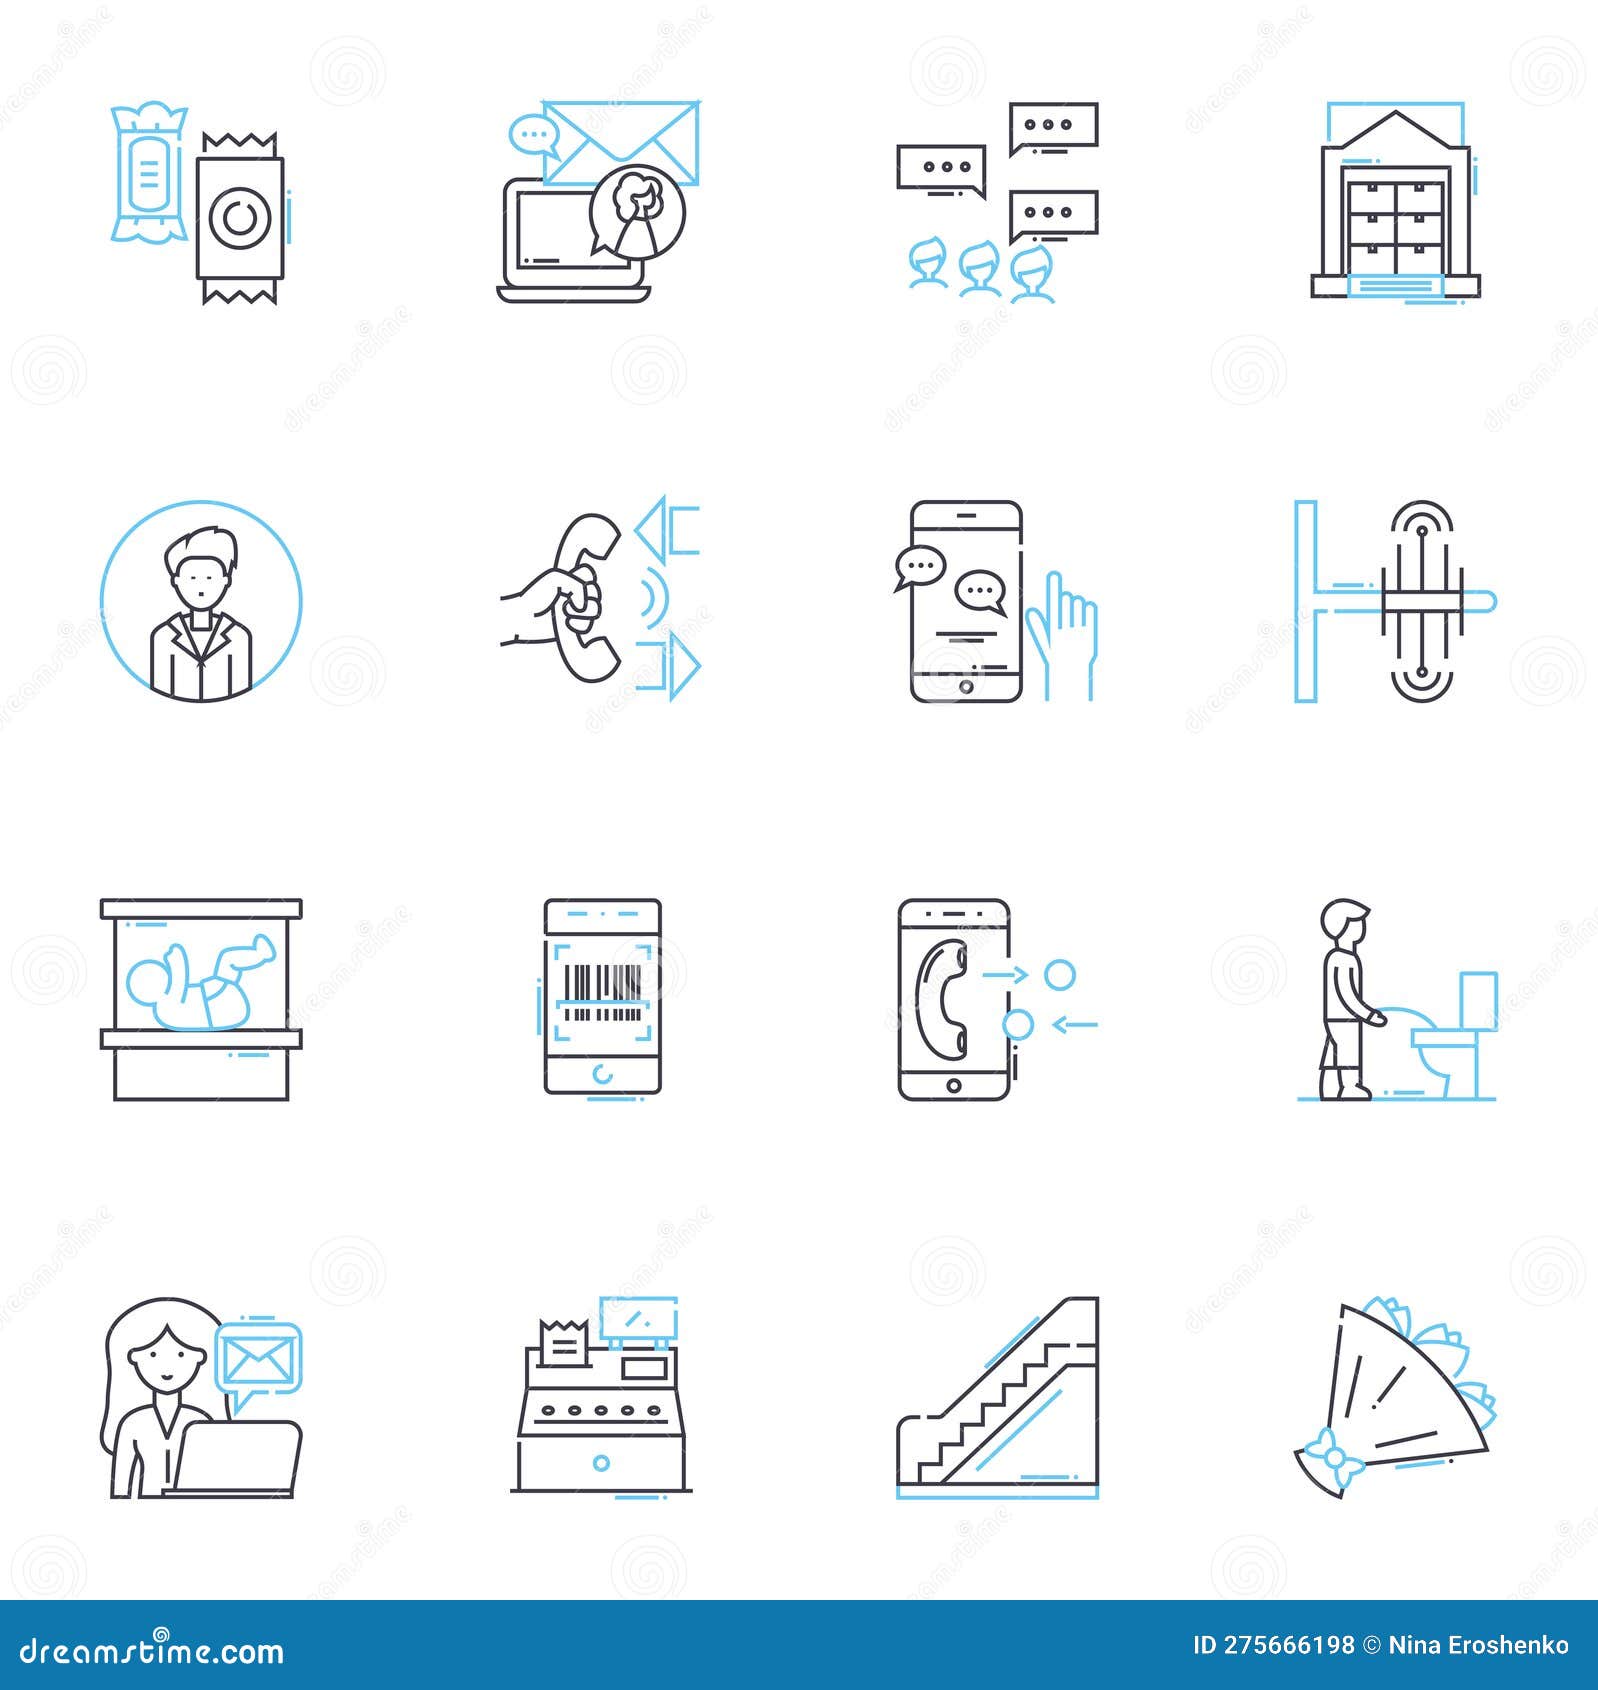 machine partners linear icons set. collaboration, integration, automation, efficiency, synergy, coordination